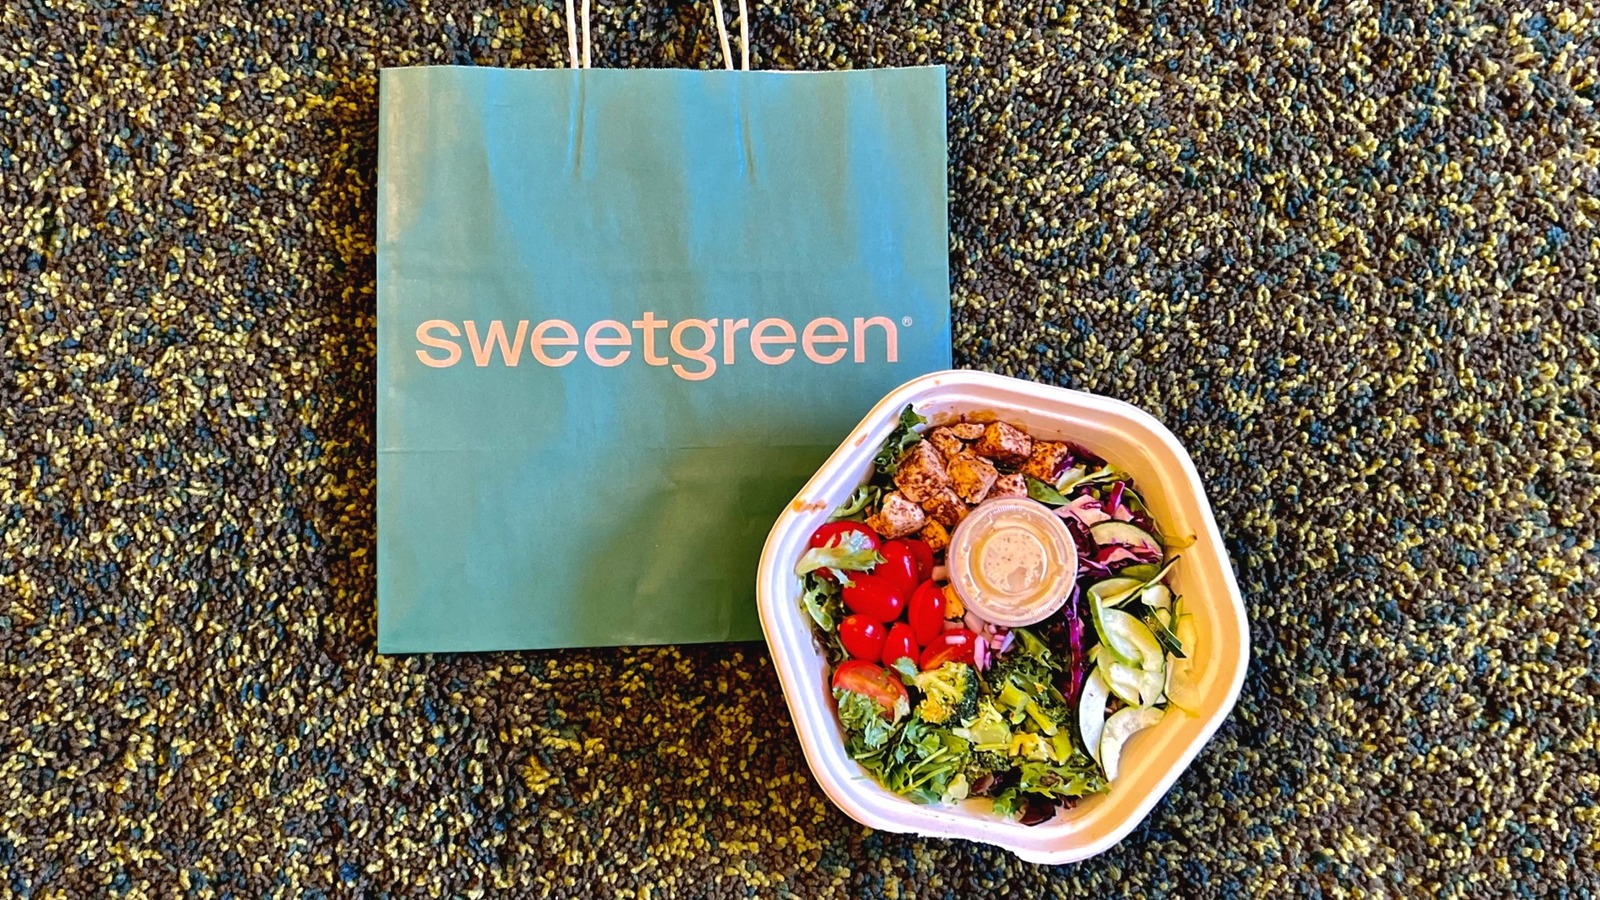 The Reneé Rapp Sweetgreen Bowl Review: Is This New Salad Collab A Hit?